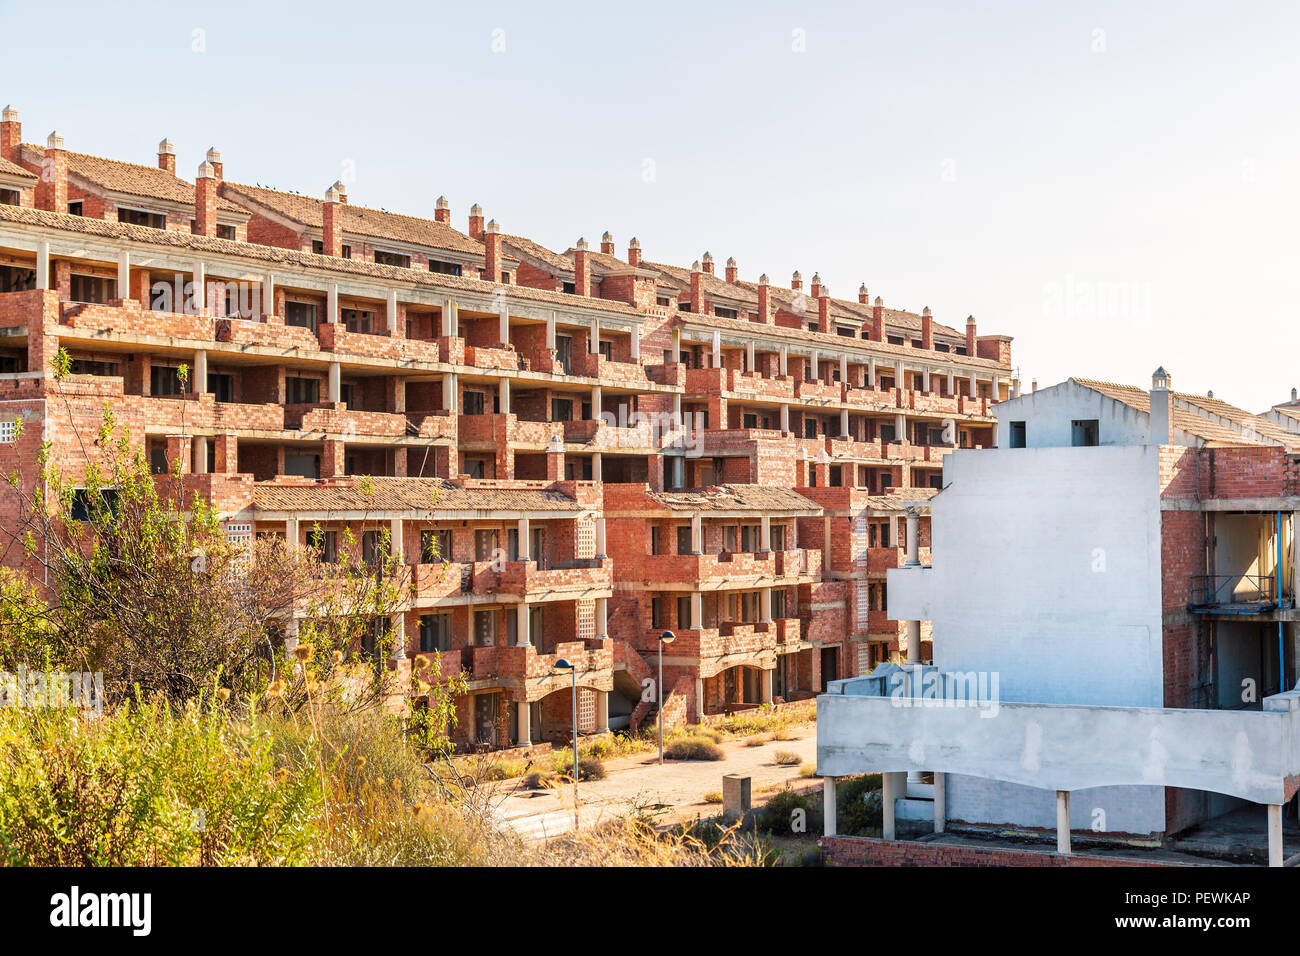 Unfinished residential buidlings in Andalucia Spain abandoned after the property bubble burst with the financial crash cerca 2007 Stock Photo